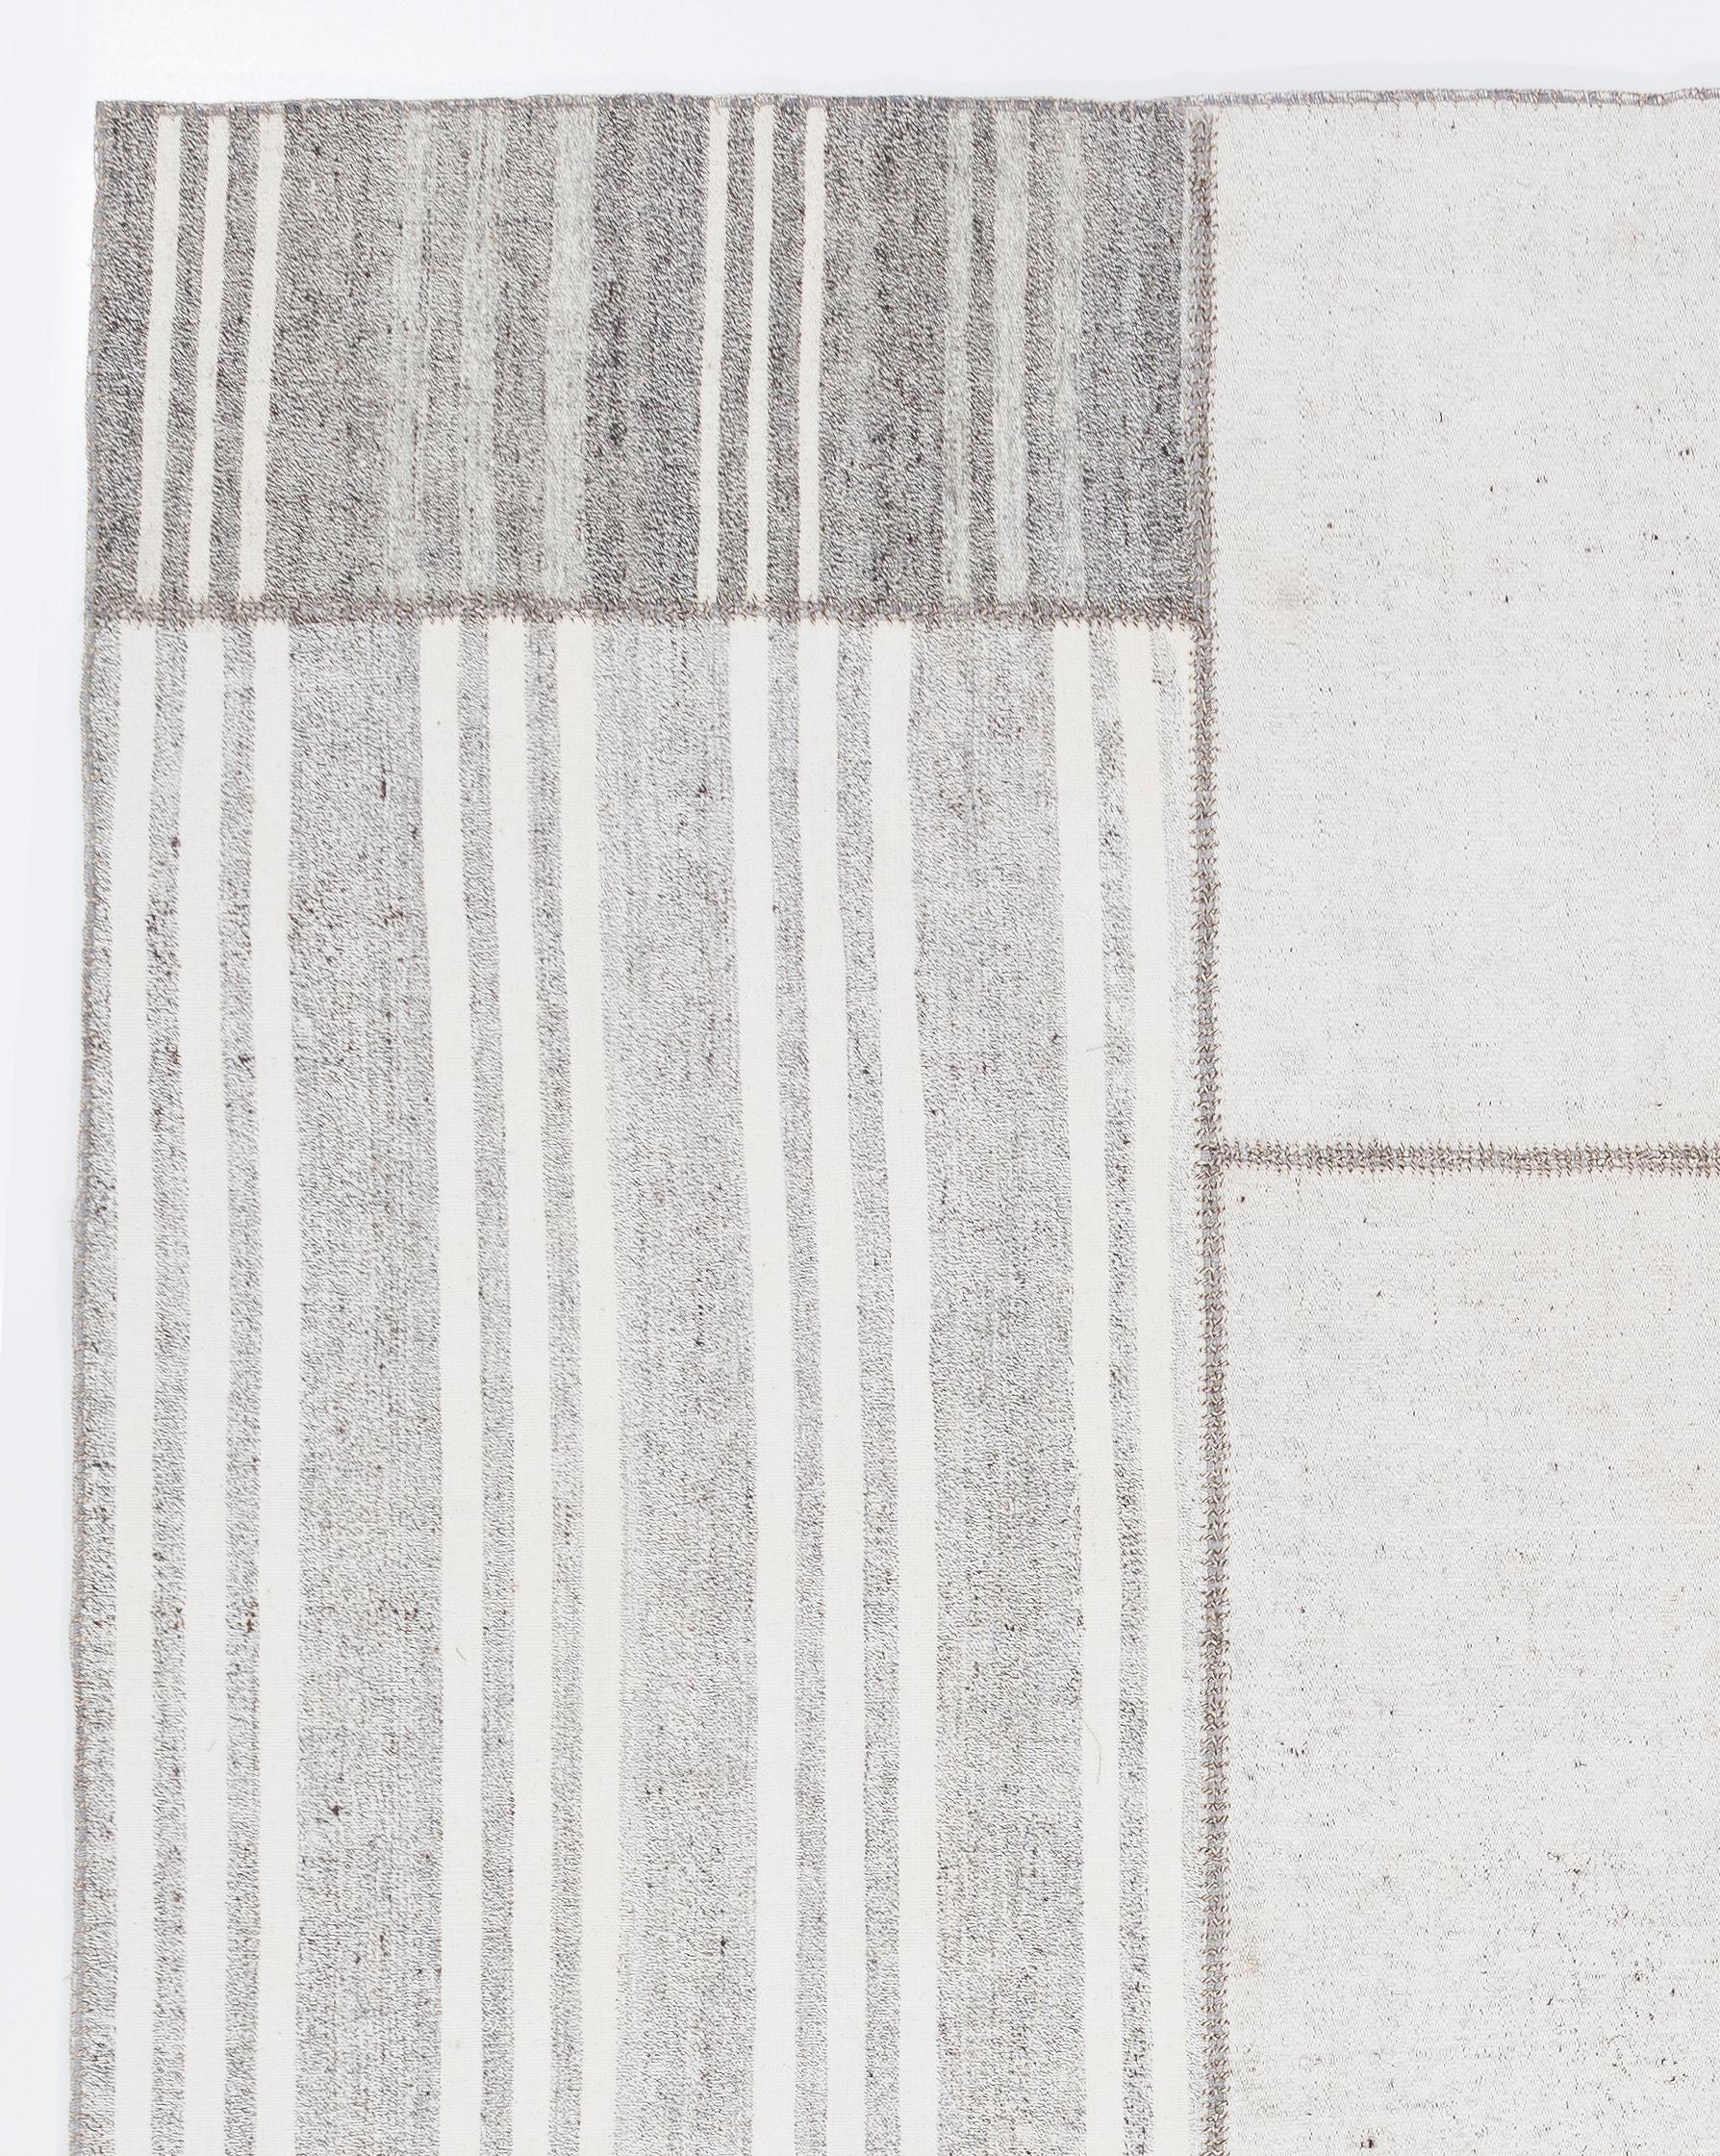 Turkish 8.4x10.3 Ft Hand-Woven Vintage Cotton Anatolian Kilim in Gray with White Stripes For Sale